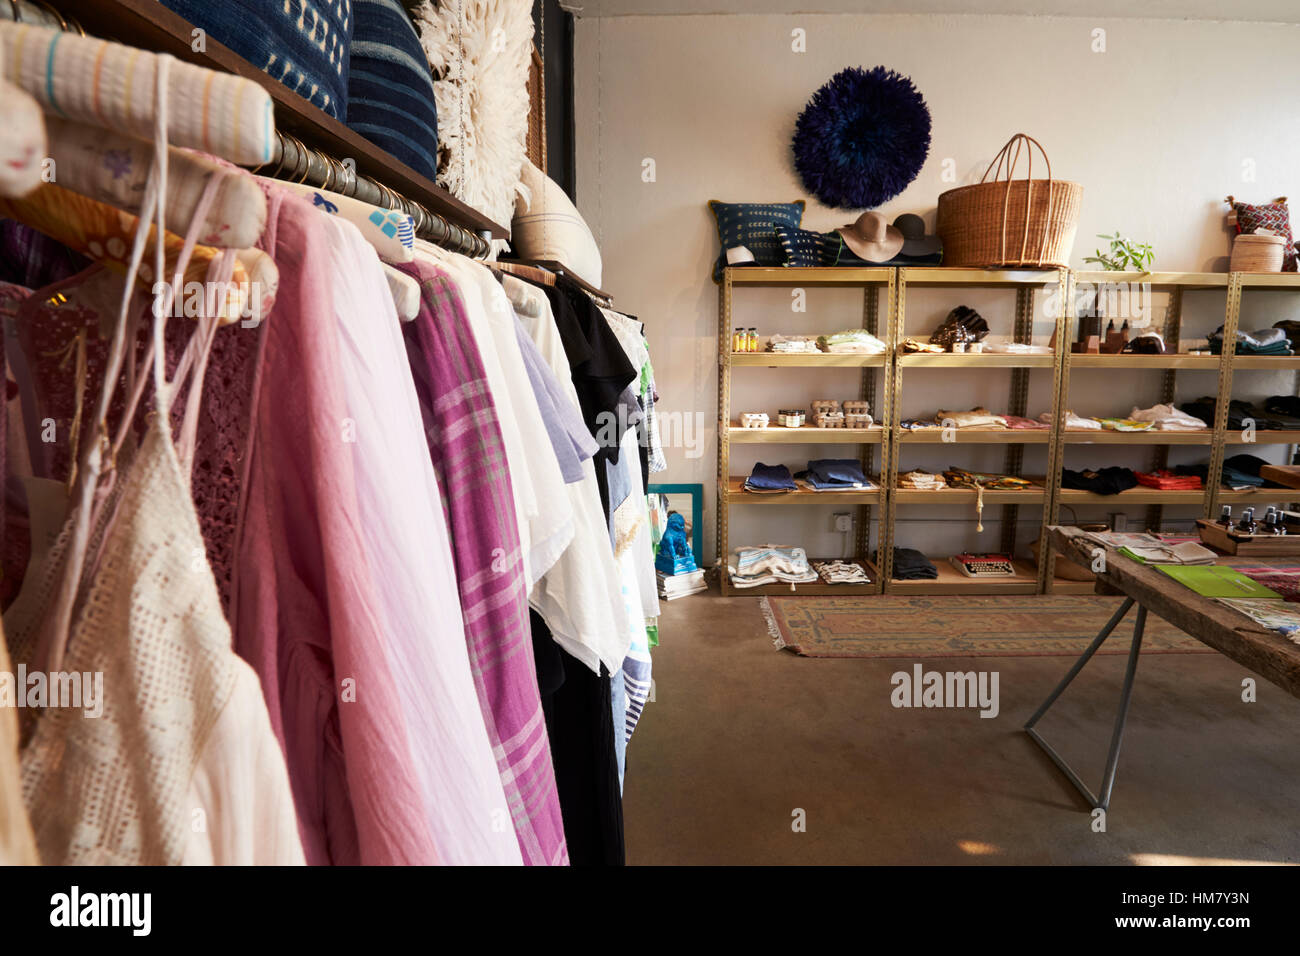 Clothes hanging on a rail in a clothes and accessories shop Stock Photo